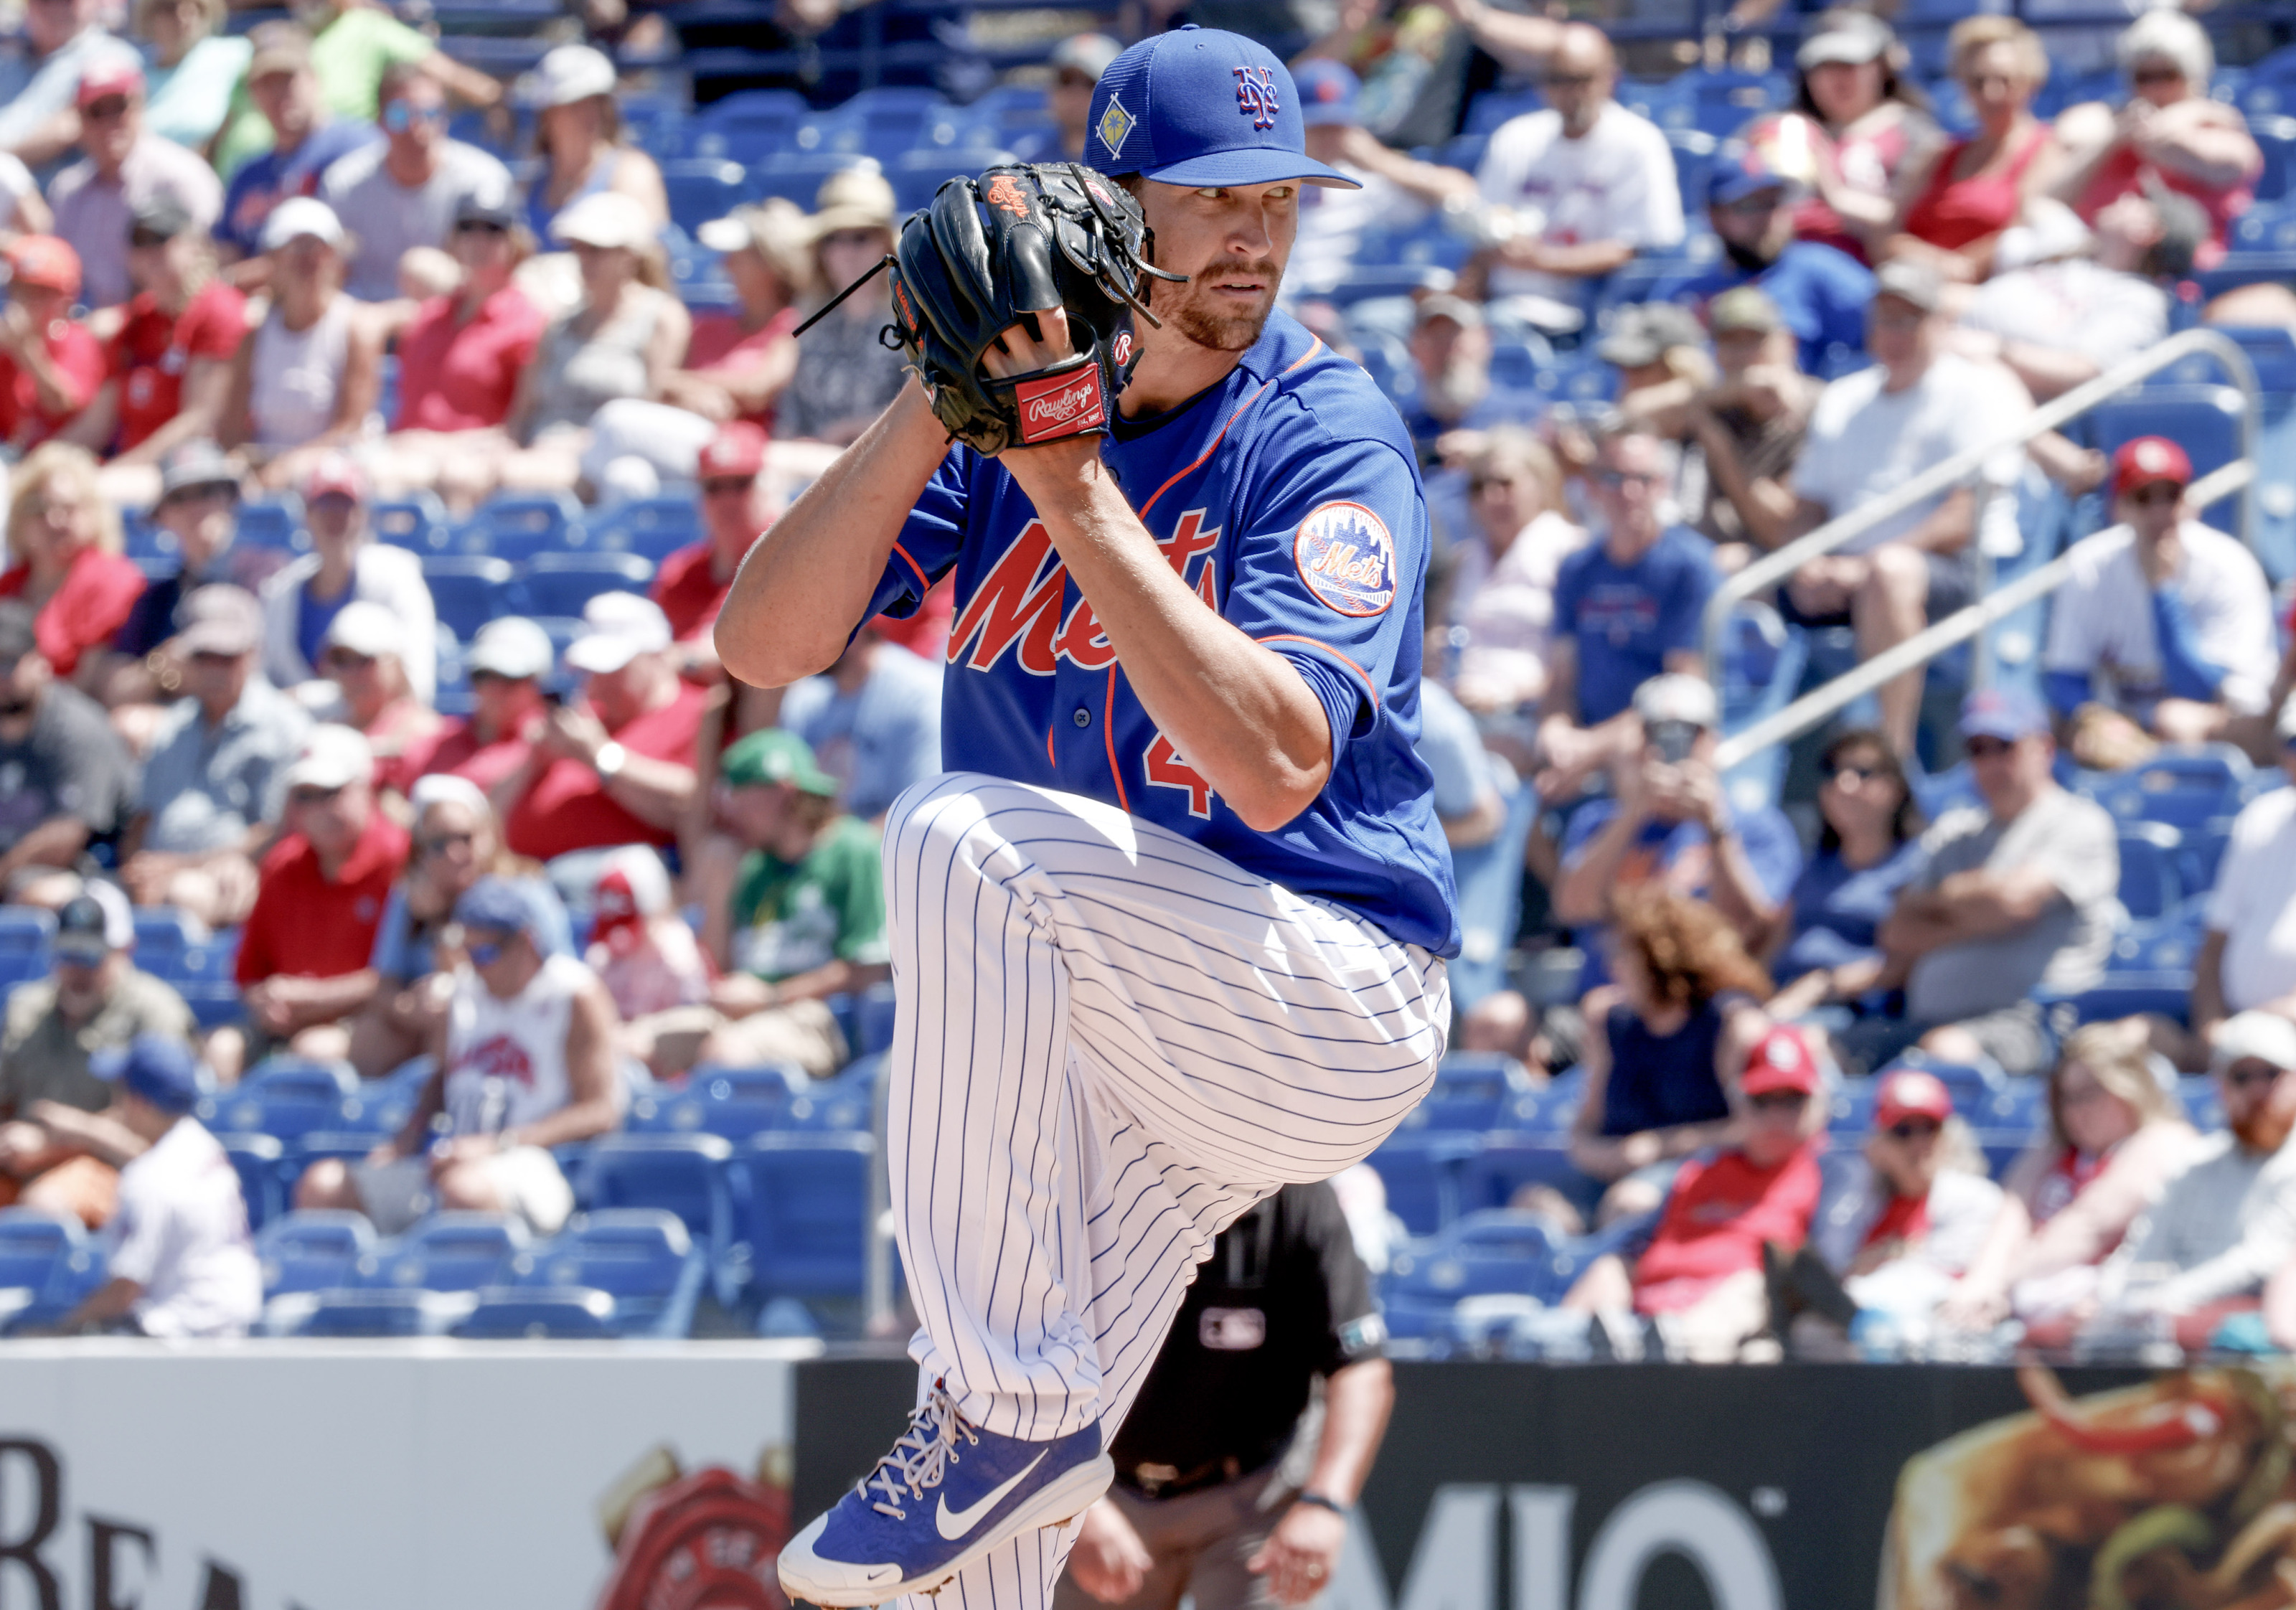 NY Mets trade rumors: Jacob deGrom a hot topic as team struggles